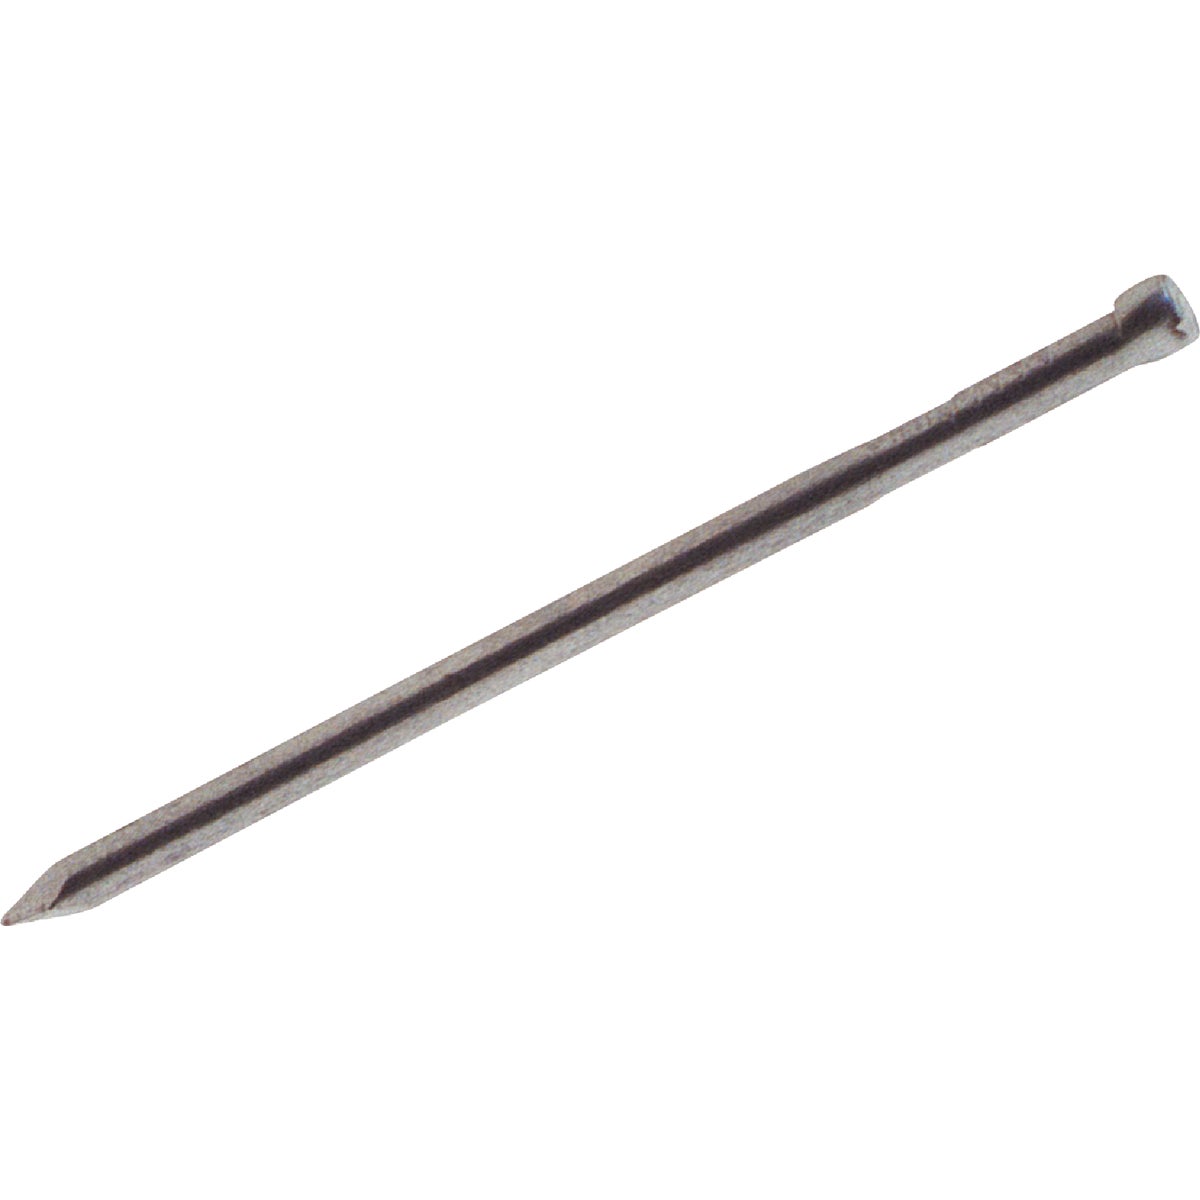 Item 722132, Thin, smooth shank, cupped brad head allows countersinking below wood 